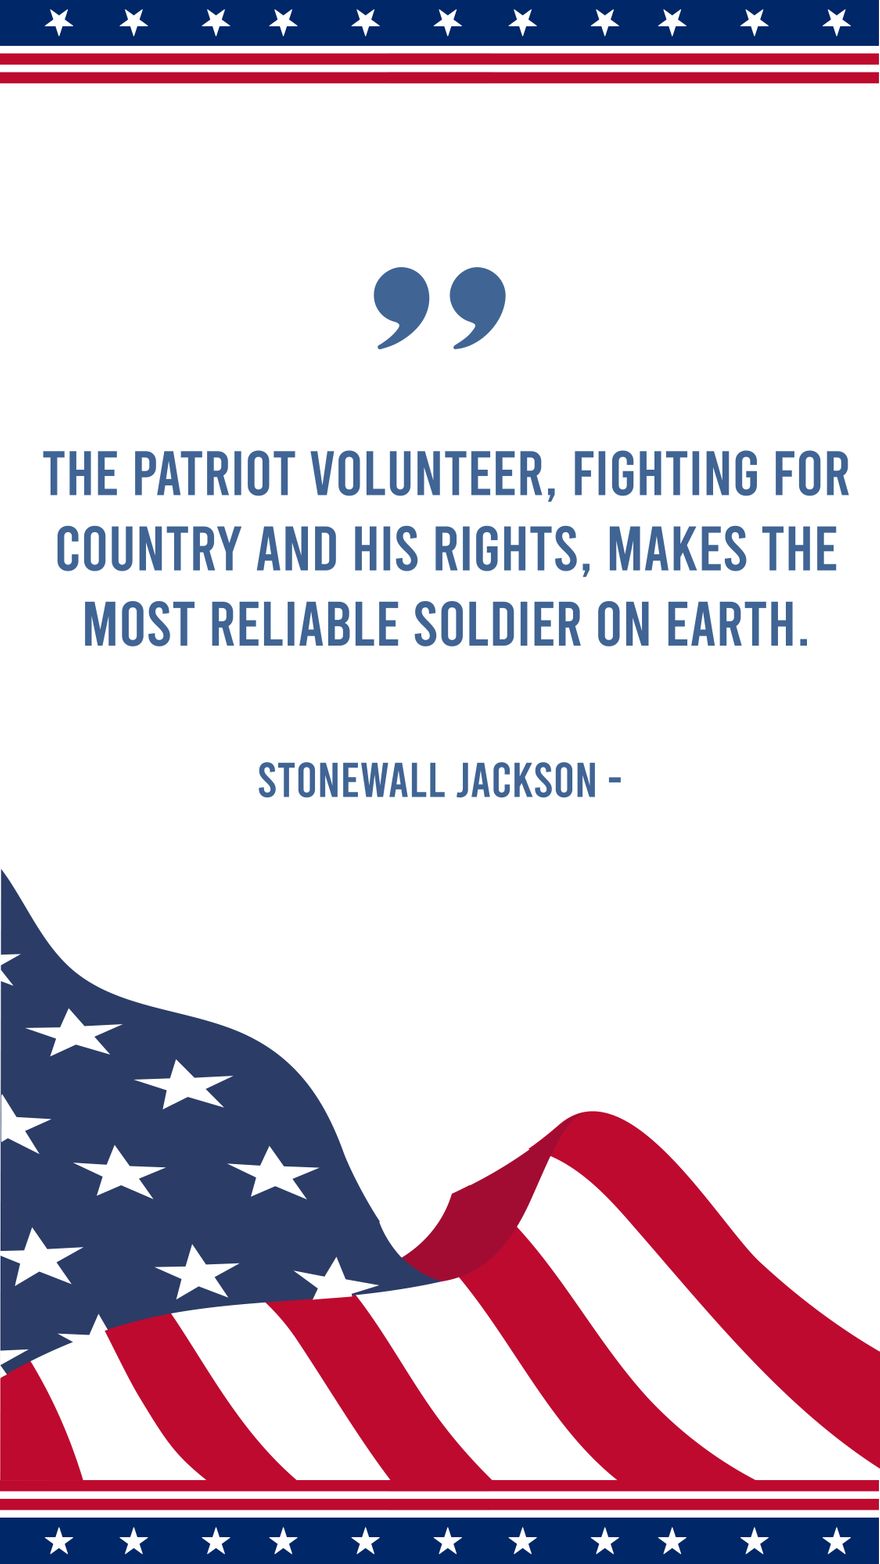 Free Stonewall Jackson - The patriot volunteer, fighting for country and his rights, makes the most reliable soldier on earth. in JPG